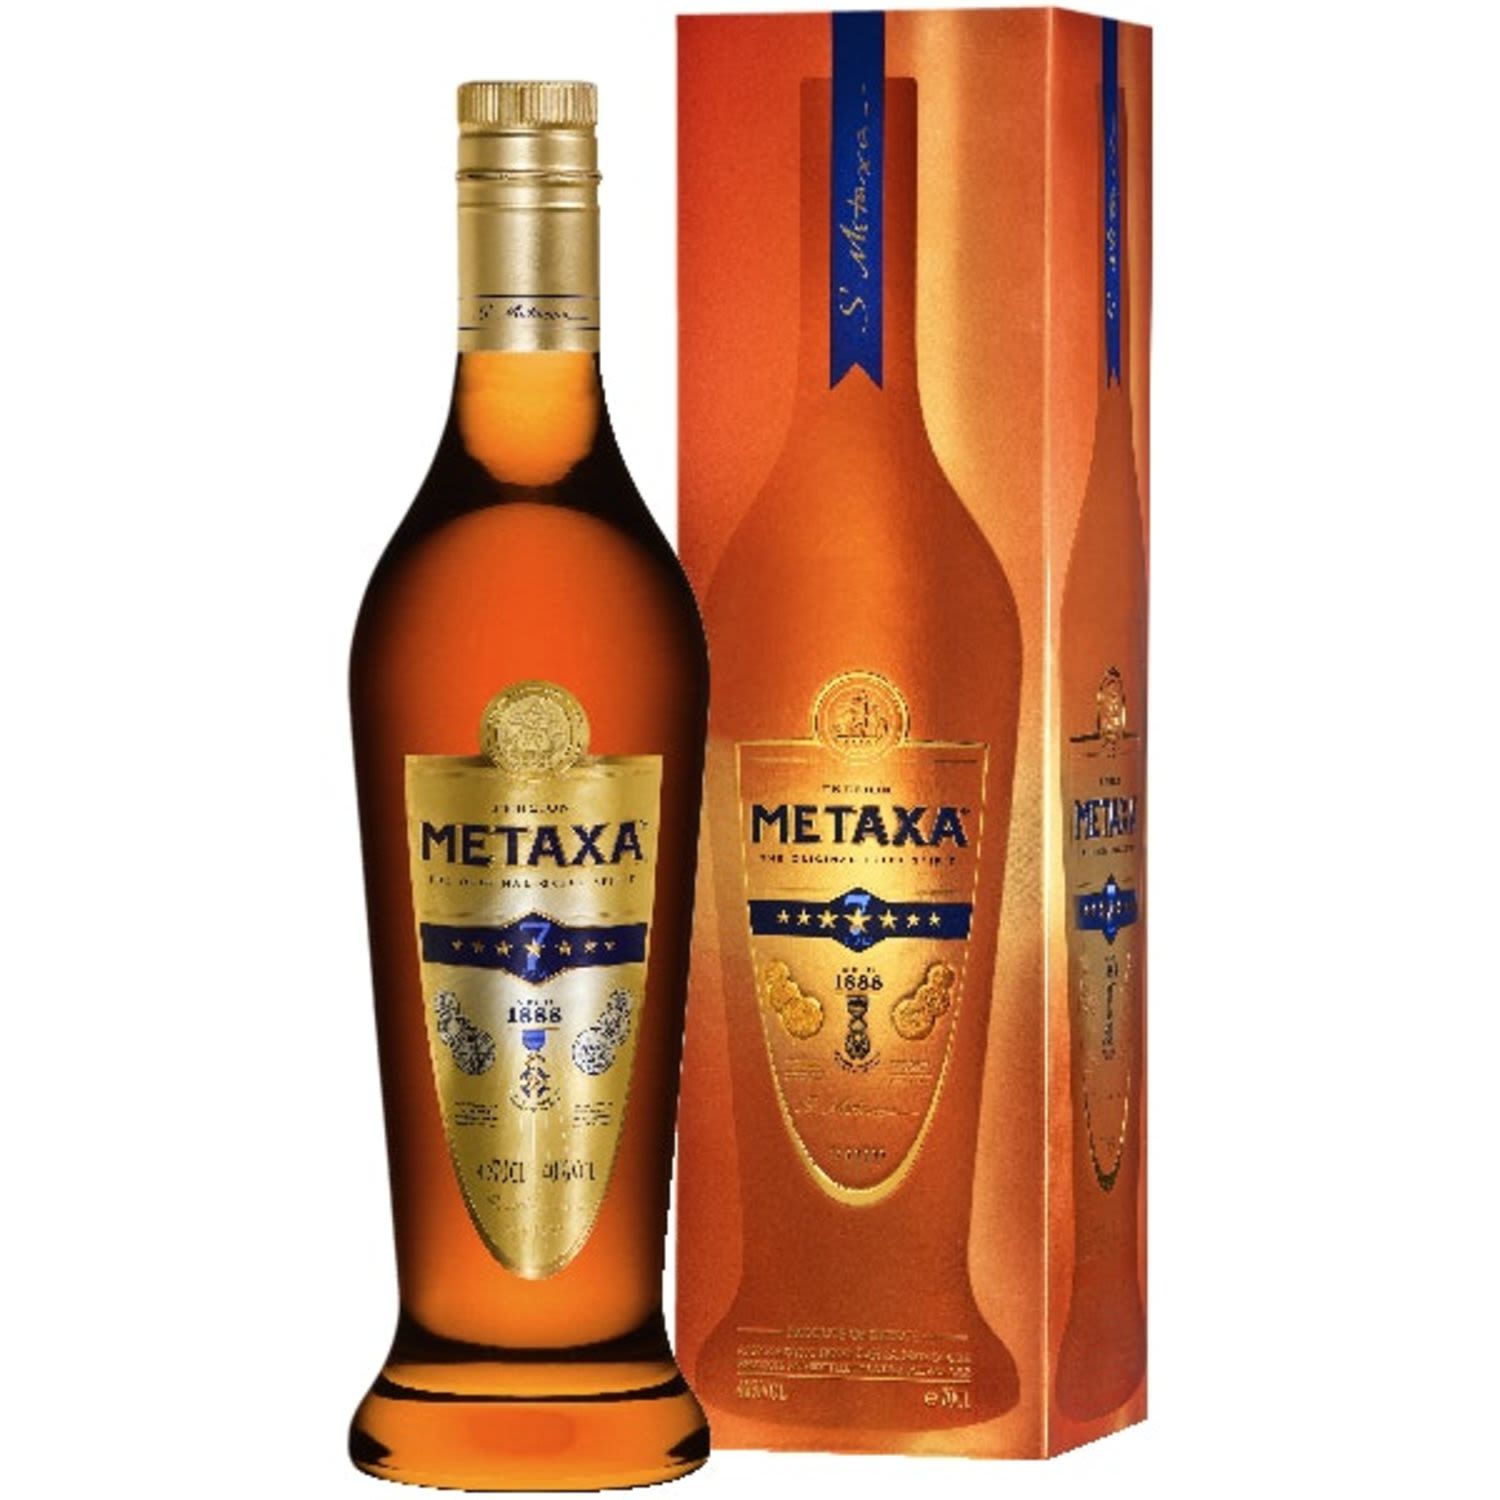 Old gold in colour, it reveals delicate fruity aromas, followed by full, balanced flavours. Metaxa 7 Star shows a fruity and generous character that is best explored neat, on ice or in cocktails.<br /> <br />Alcohol Volume: 40.00%<br /><br />Pack Format: Bottle<br /><br />Standard Drinks: 22.1</br /><br />Pack Type: Bottle<br /><br />Country of Origin: Greece<br />